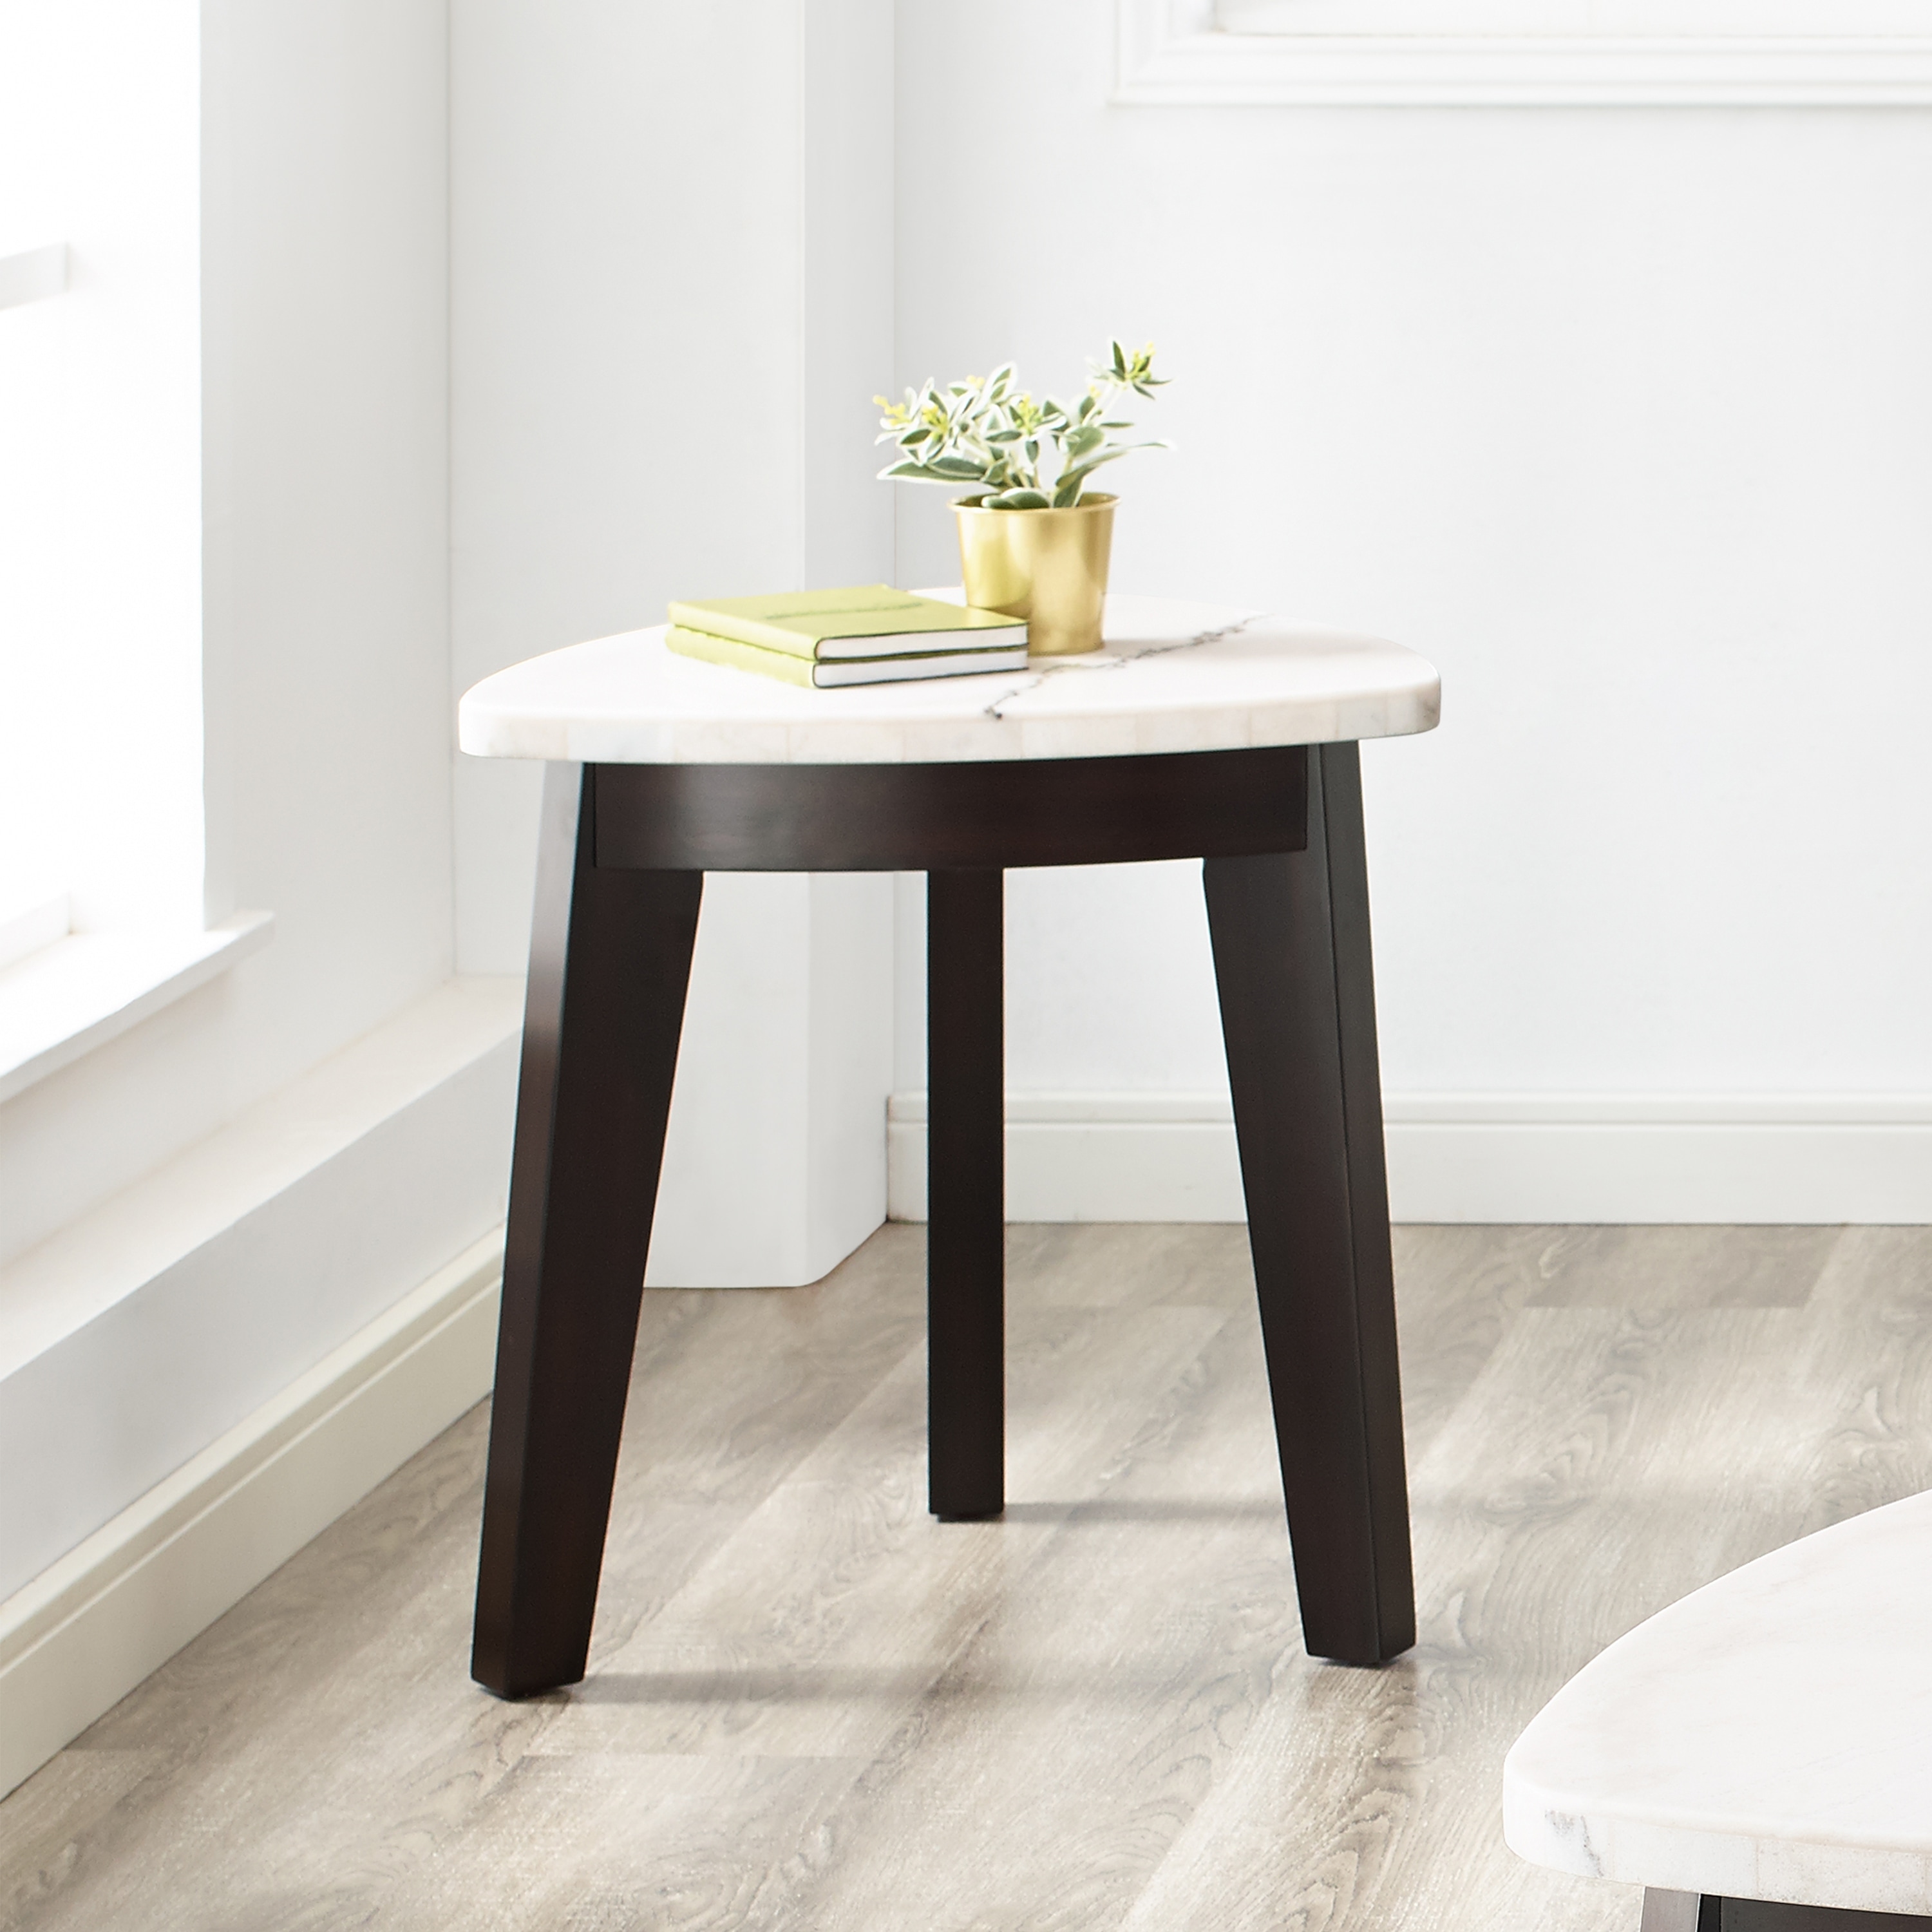 Greyson Living Falicity White Marble Top End Table